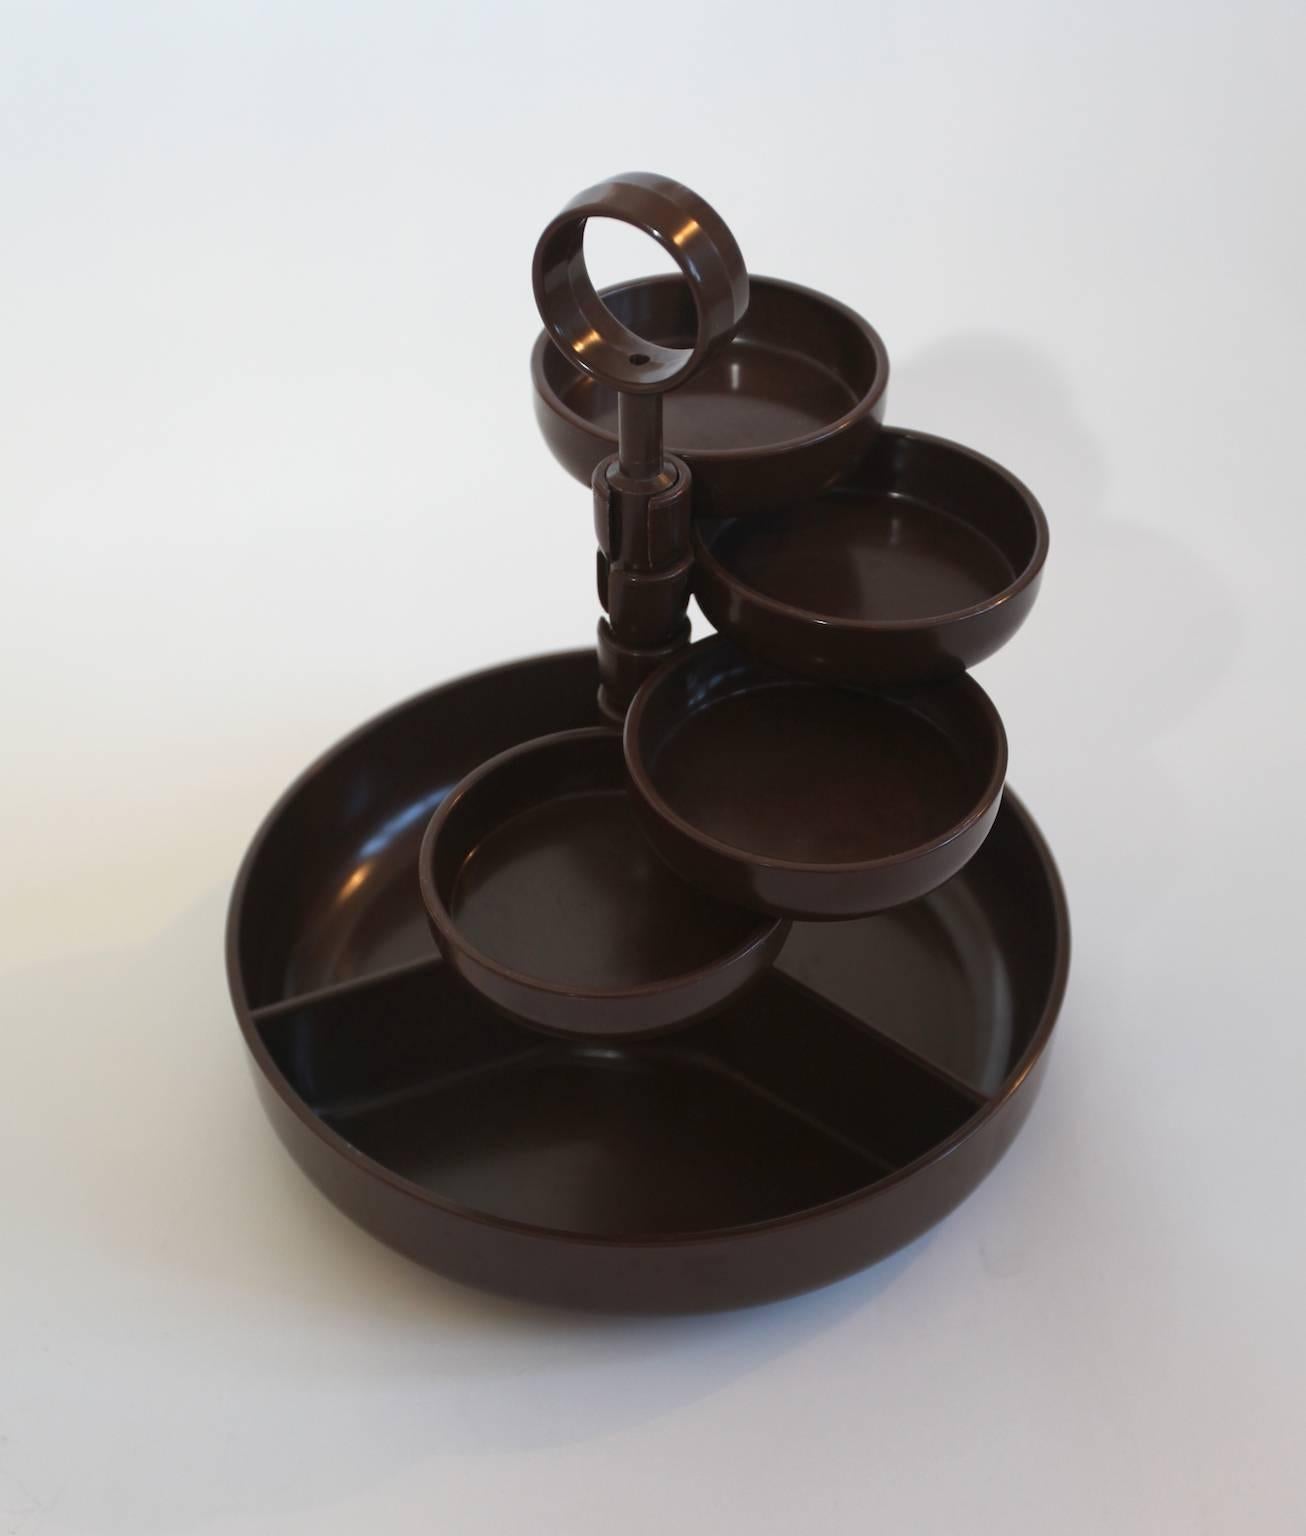 Brown Vintage Dialene better maid 1970s party snack server with rotating dishes. Made in England. Very fun, cool and practical tray.
Small repairs. See close up images.
The item can be dismounted and sent in flat package.